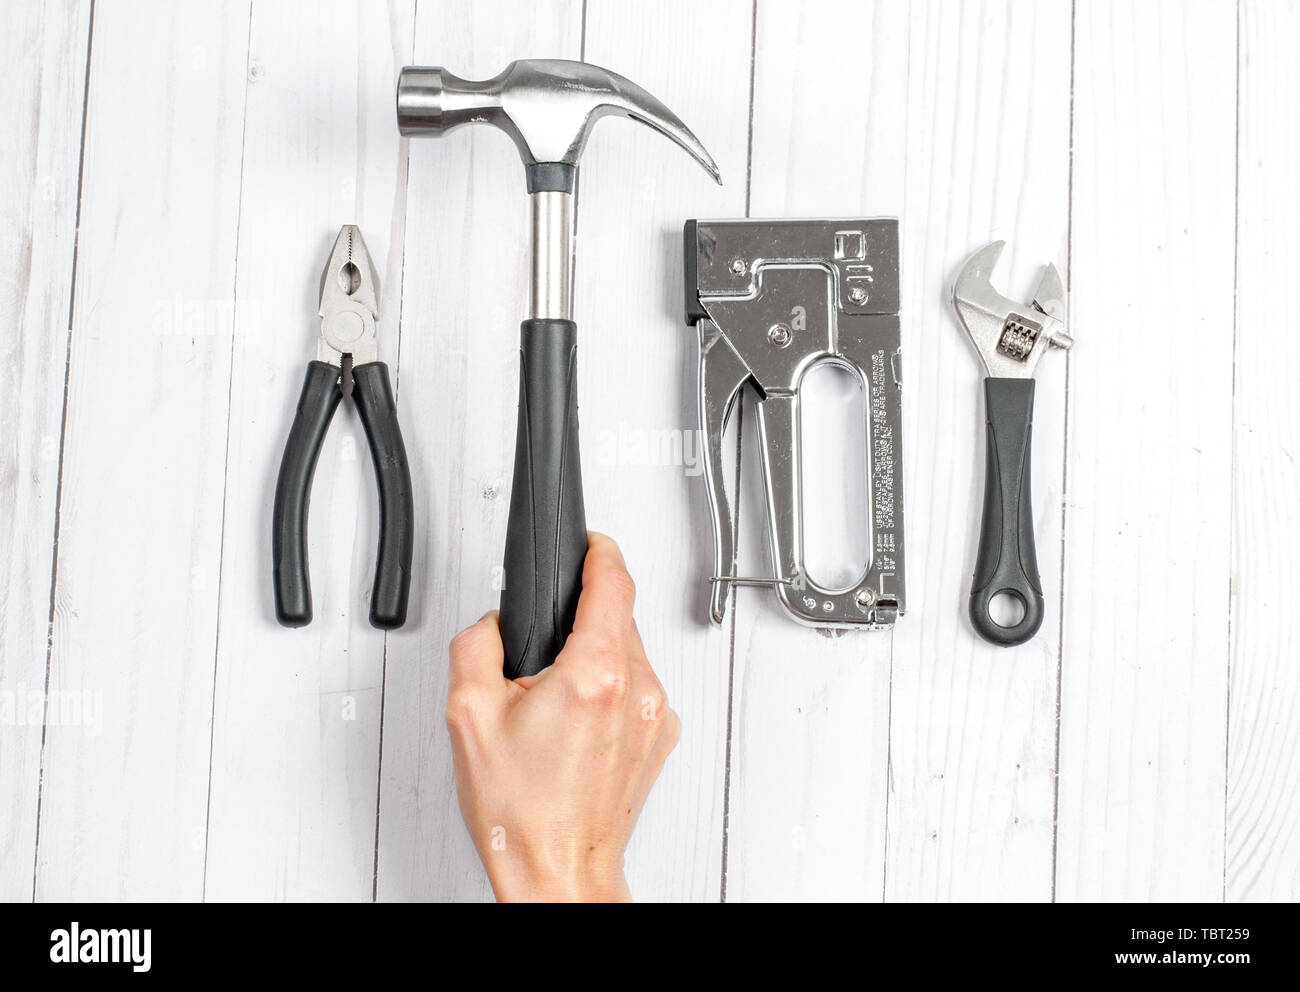 Hand holding hammer. Tools, wrenches and pliers on a white wooden background Stock Photo